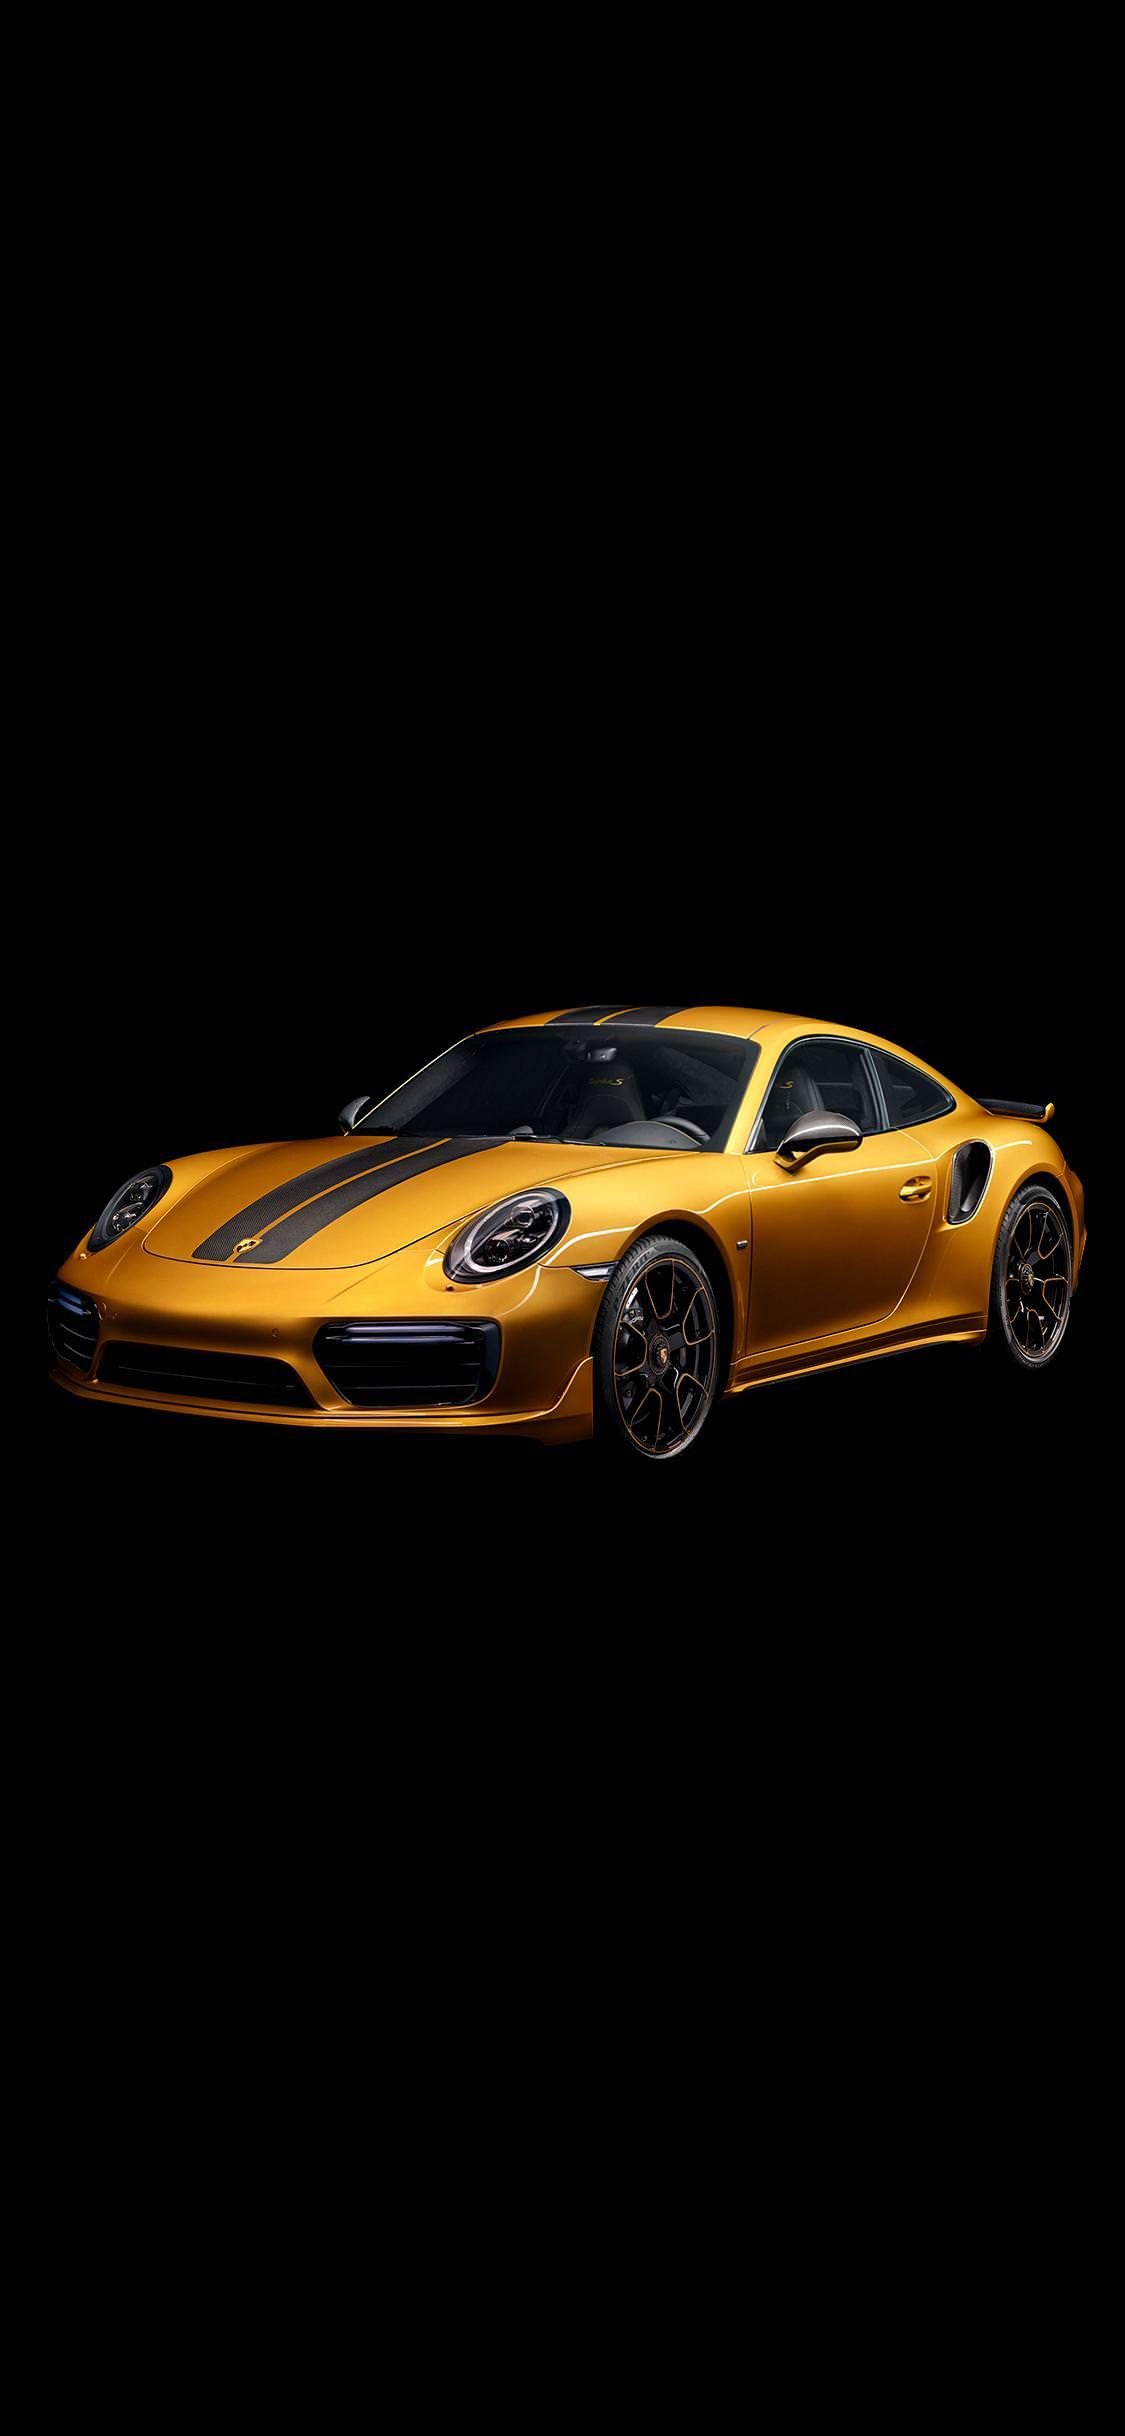 Iphone X Cars Wallpapers